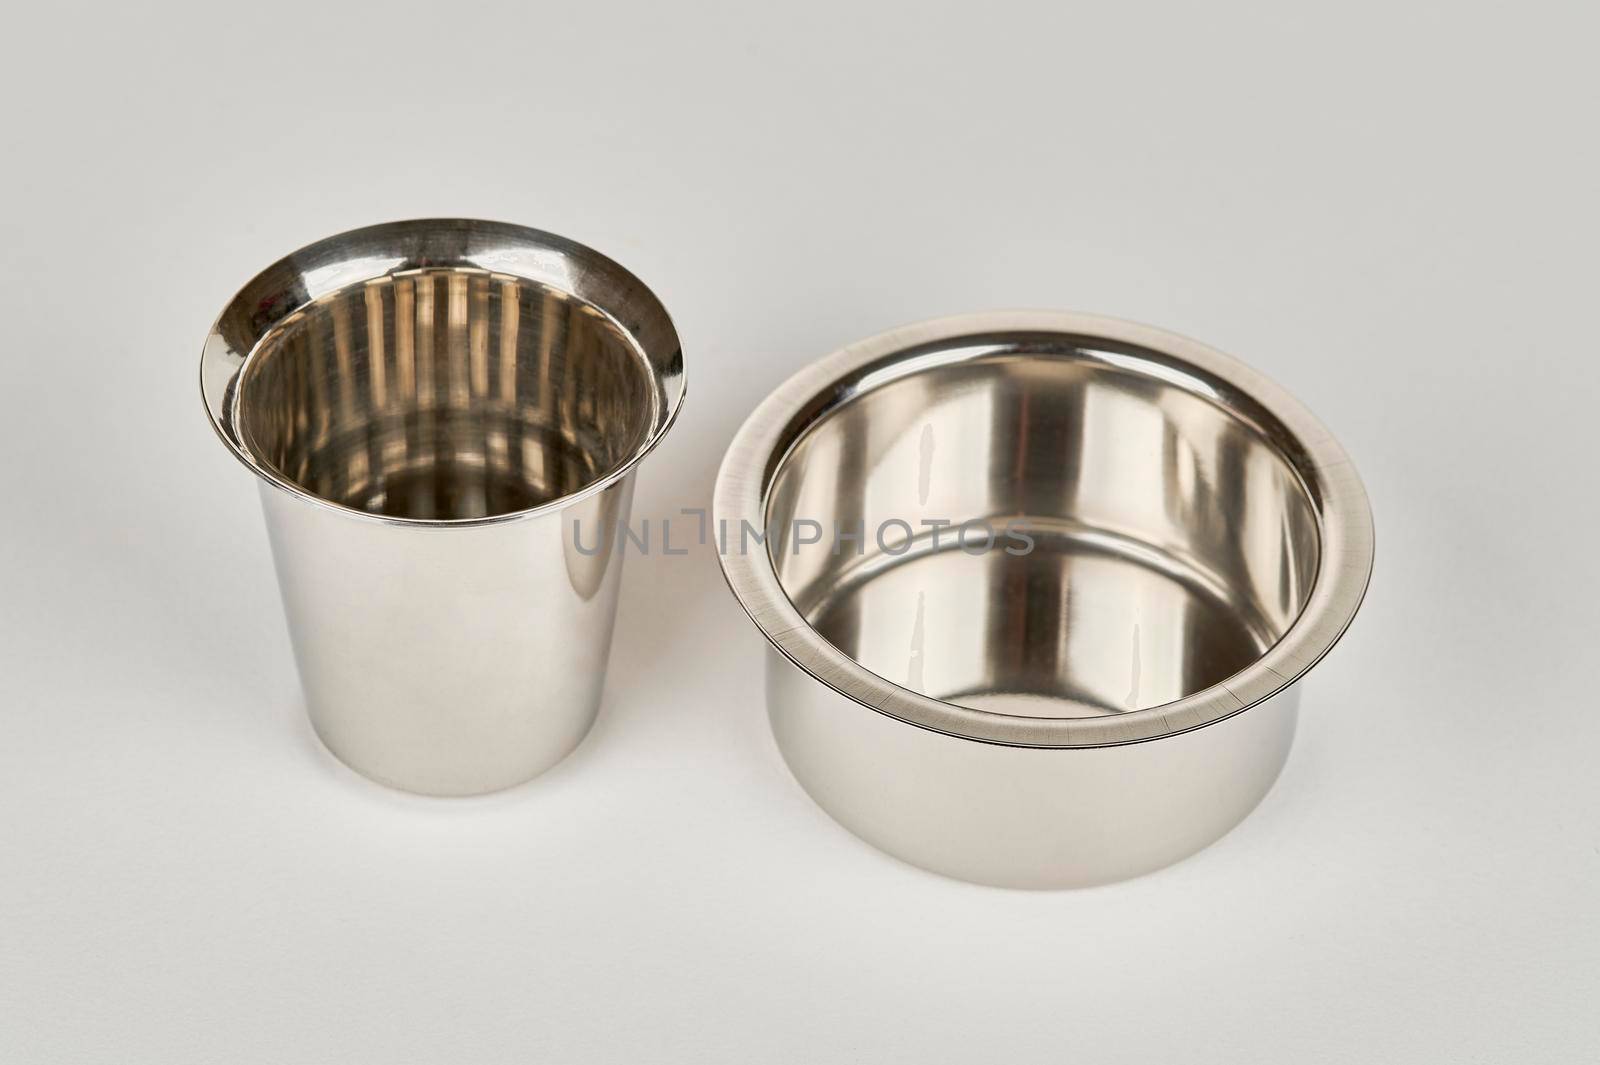 Steel dabarah and tumbler for filfer coffee, on a white background